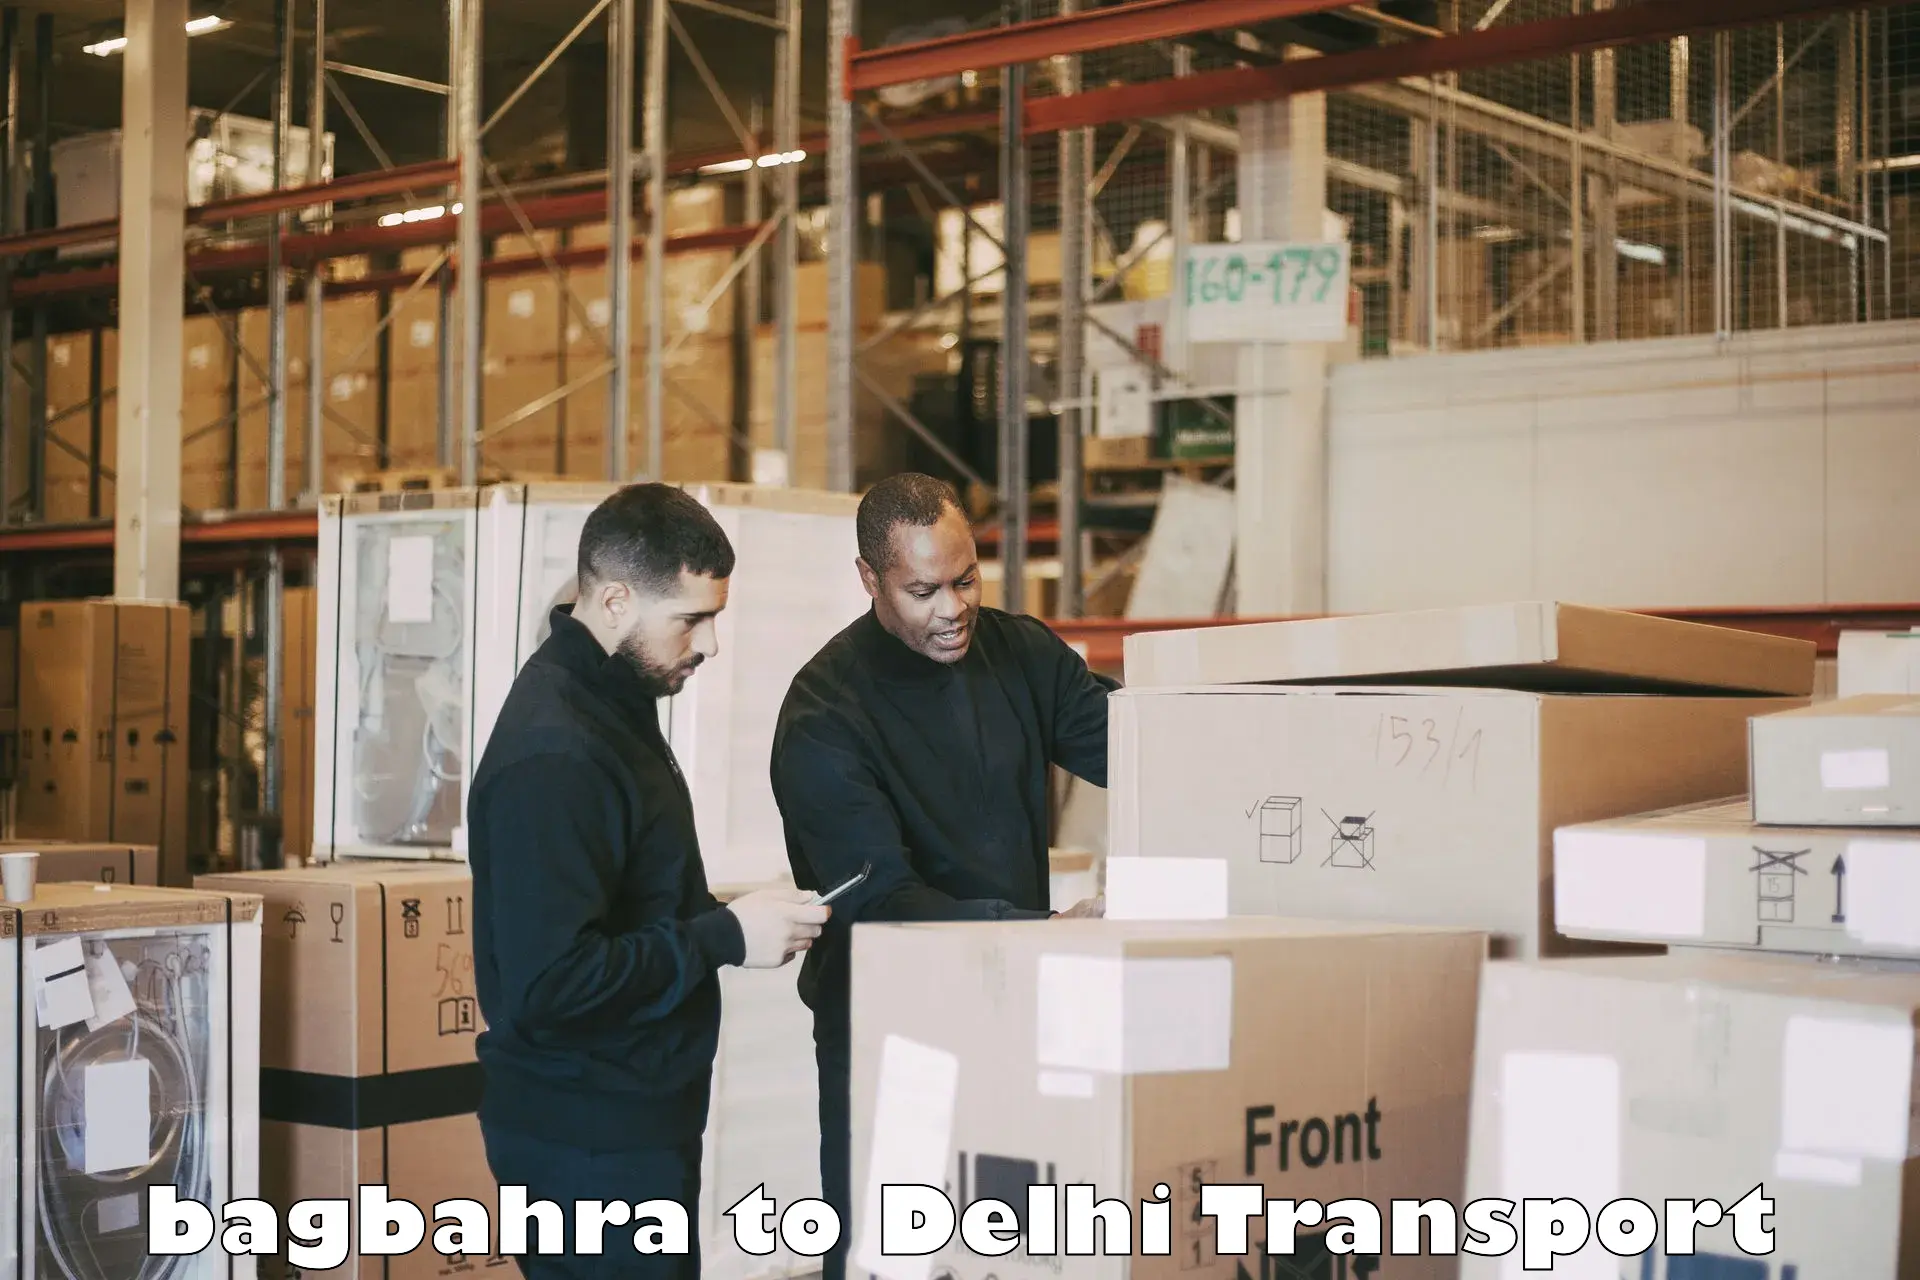 Interstate transport services bagbahra to East Delhi